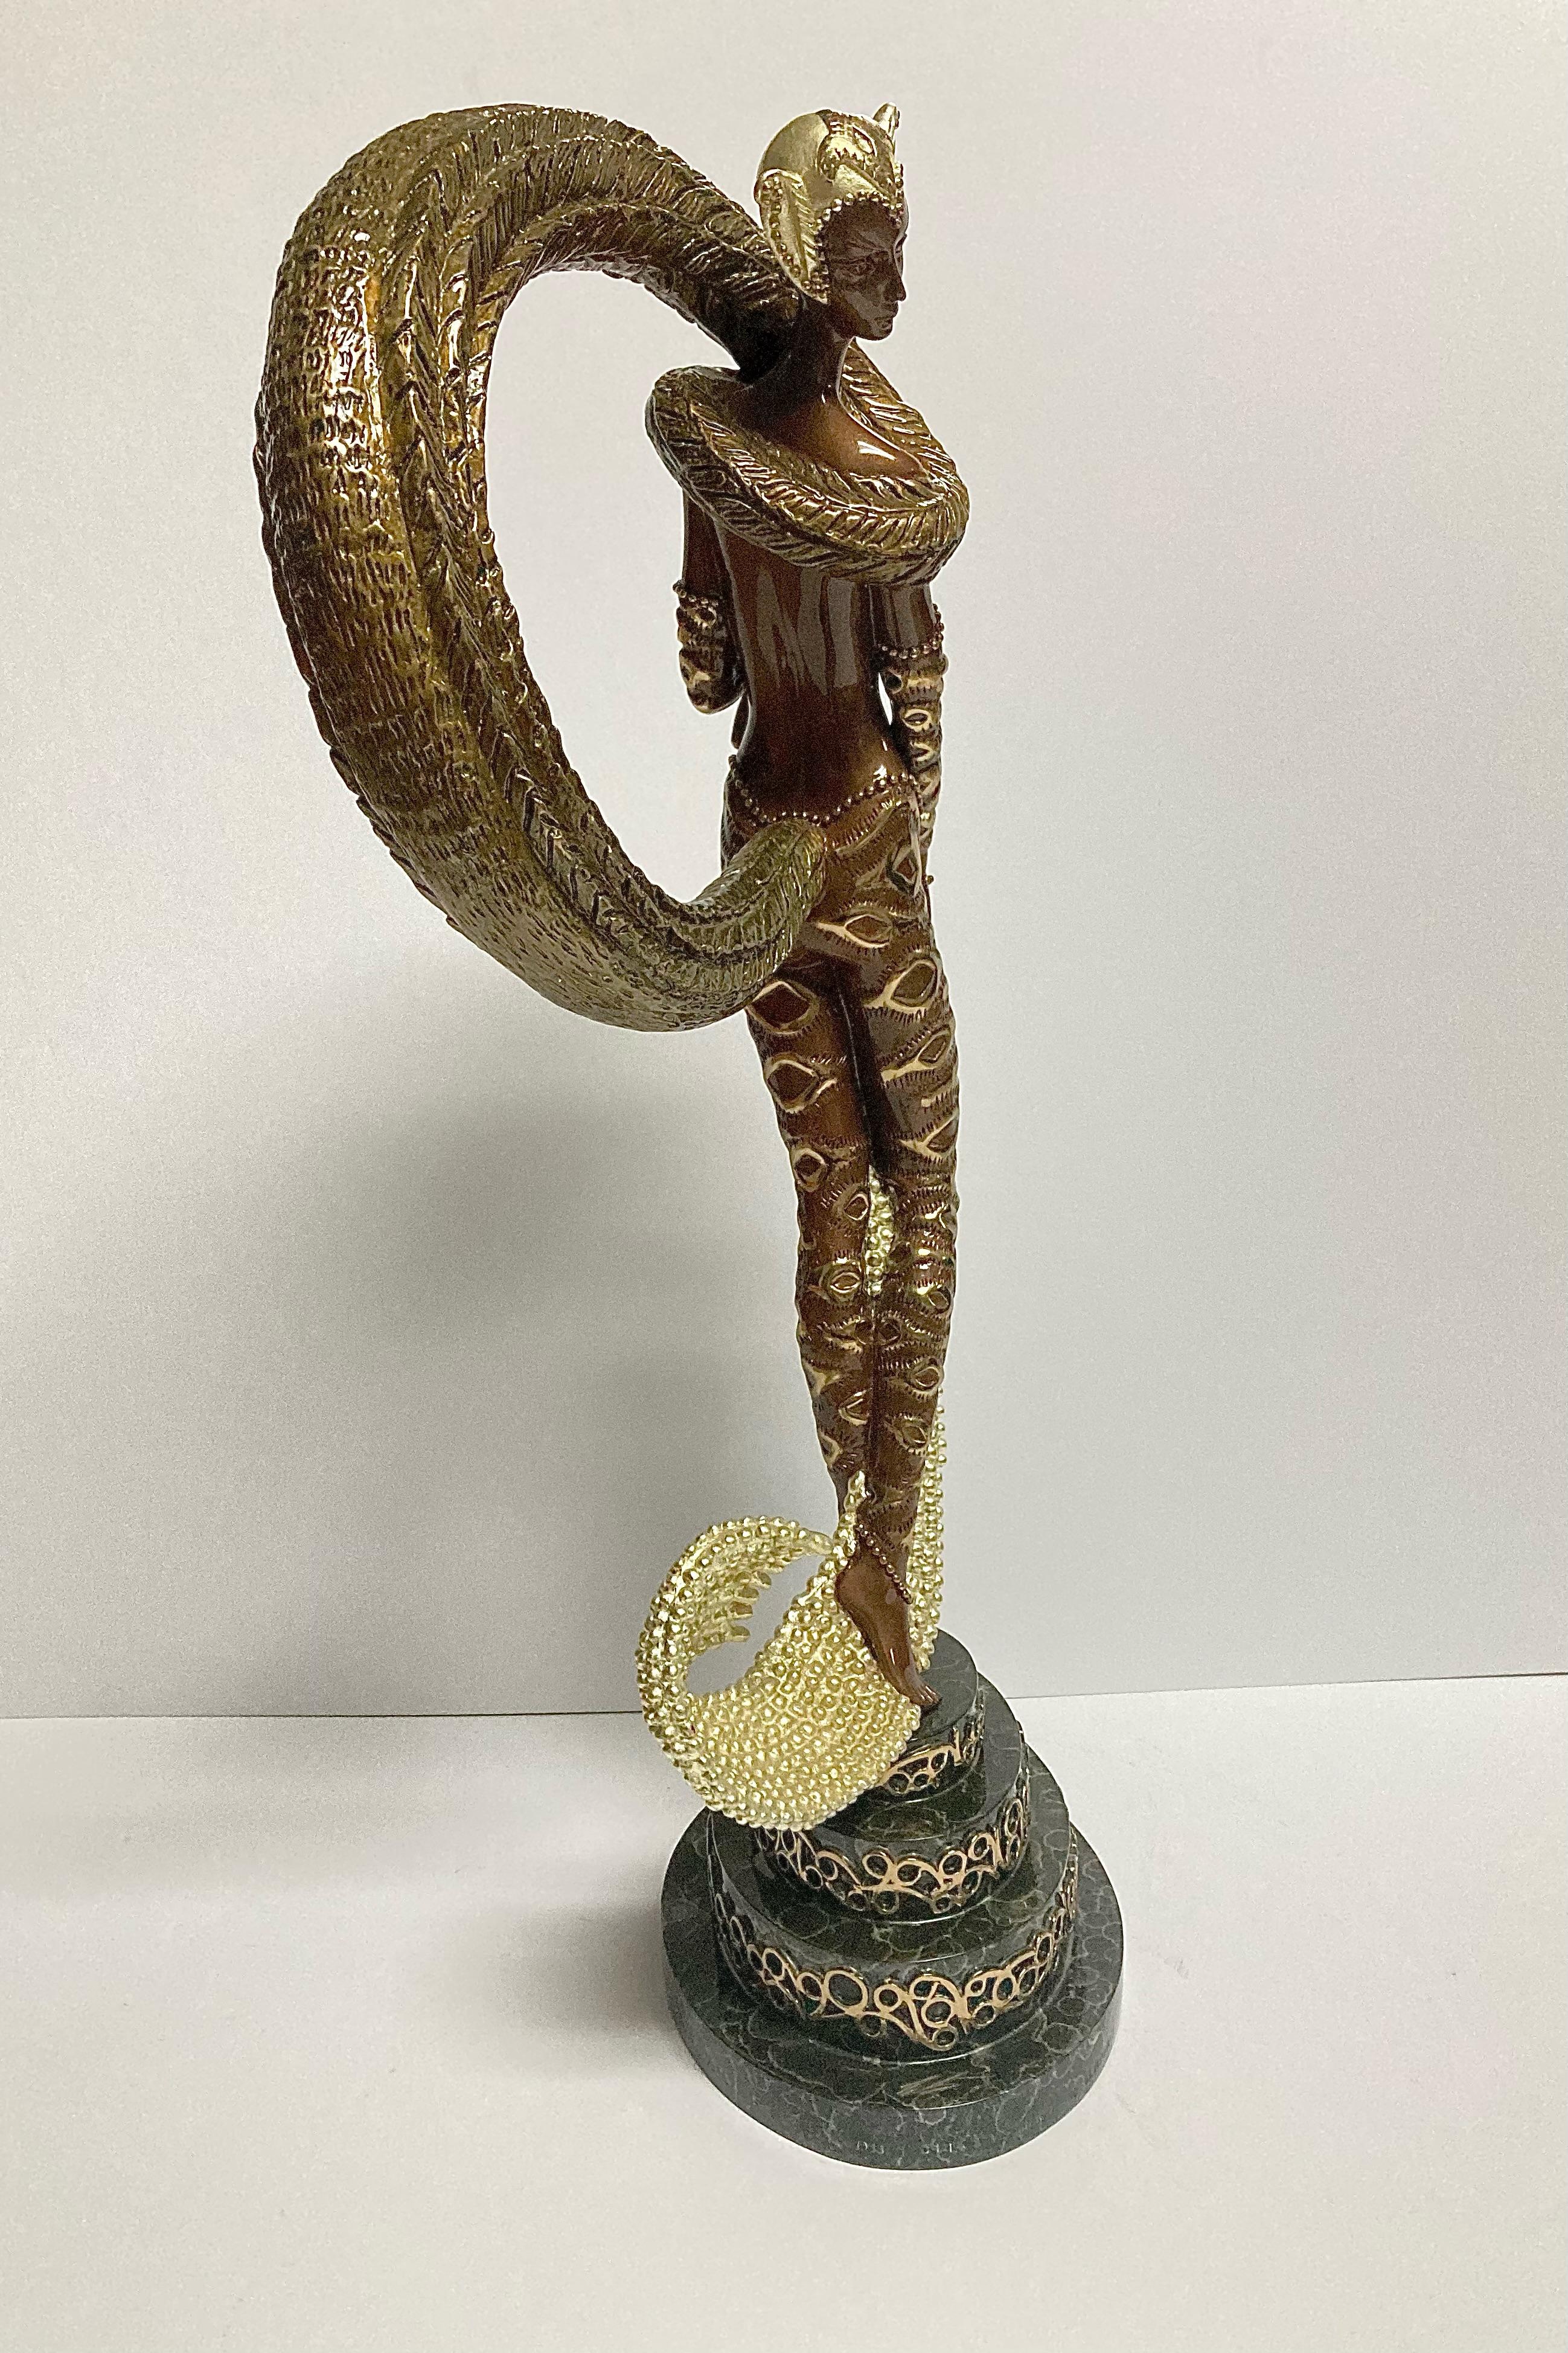 Erte Bronze “Masquerade” Signed And Numbered. In excellent condition. Measures 20x7

